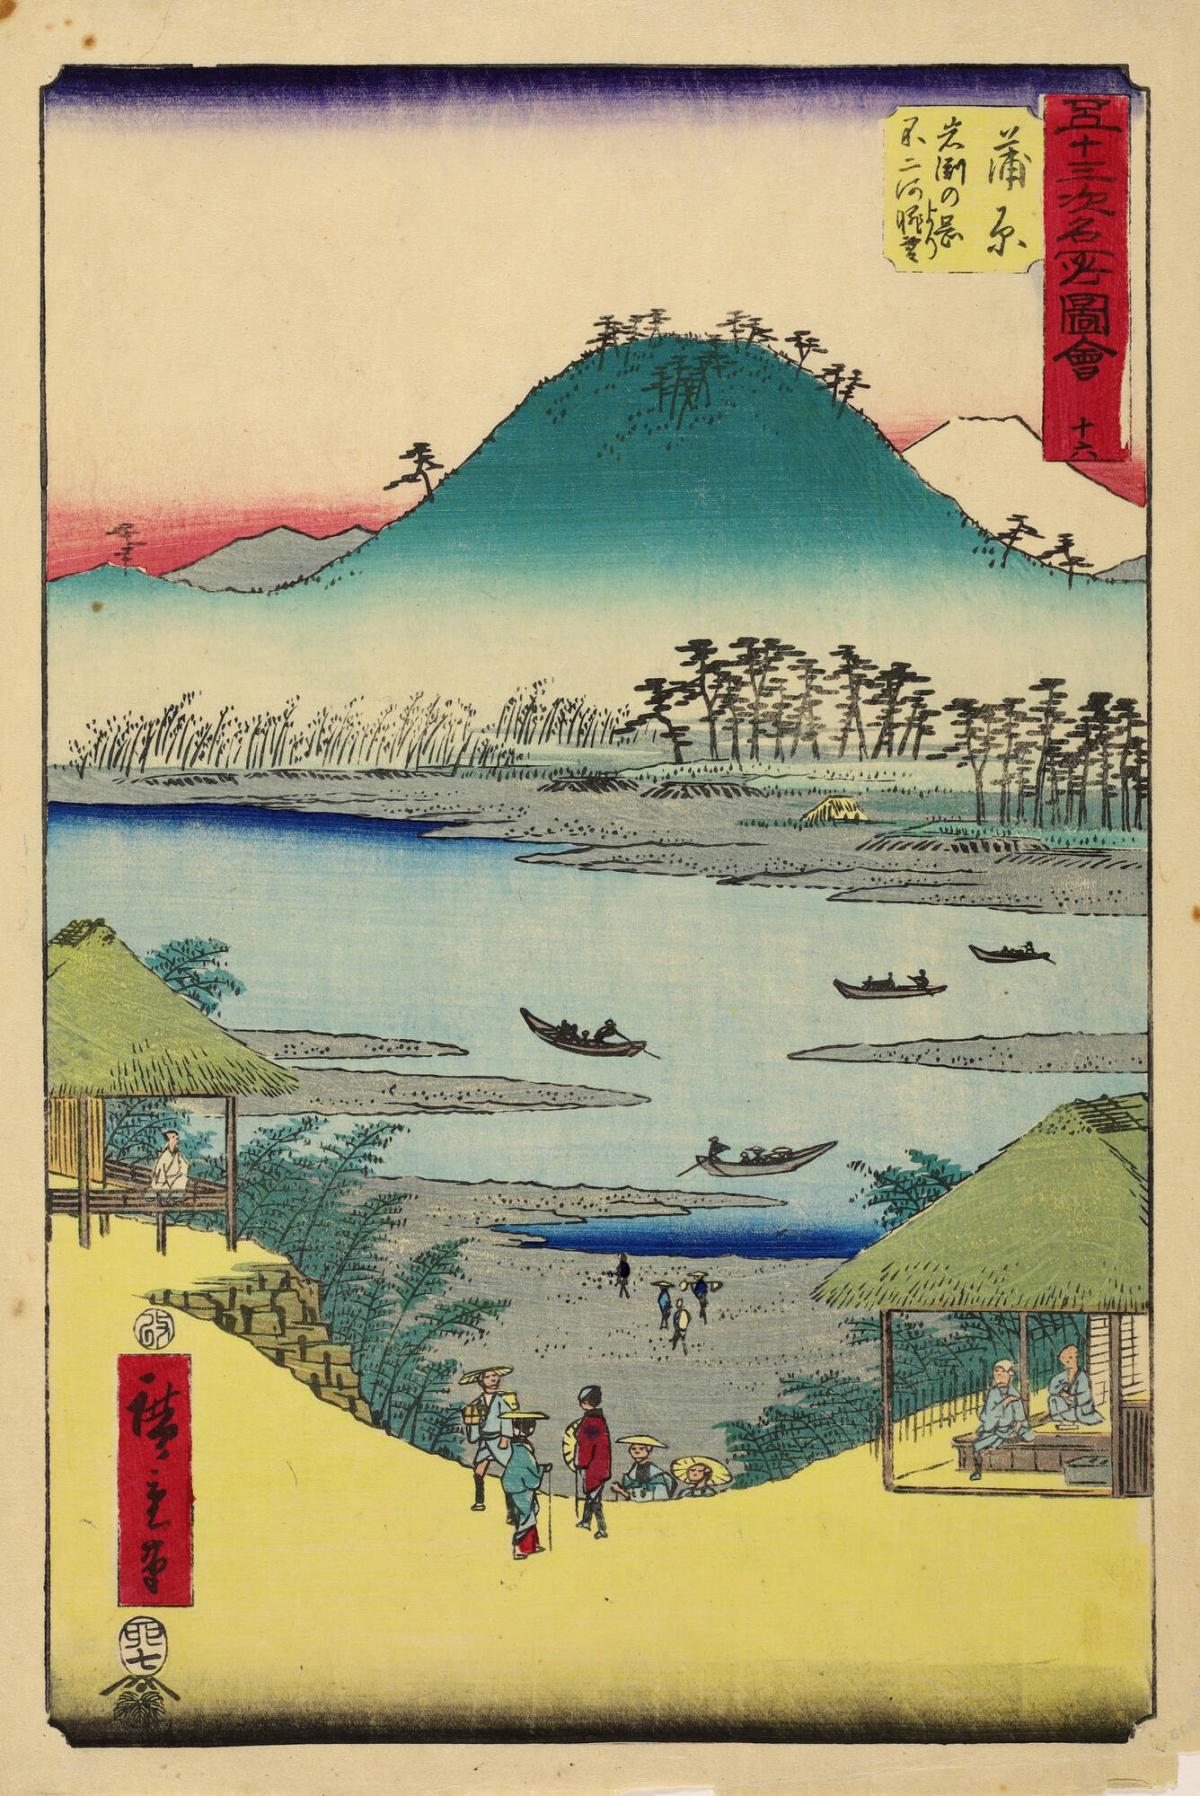 View of the Fuji River from Iwabuchi Hill near Kambara, no. 16 from the series Pictures of Famous Places of the Fifty-three Stations [of the Tōkaidō]